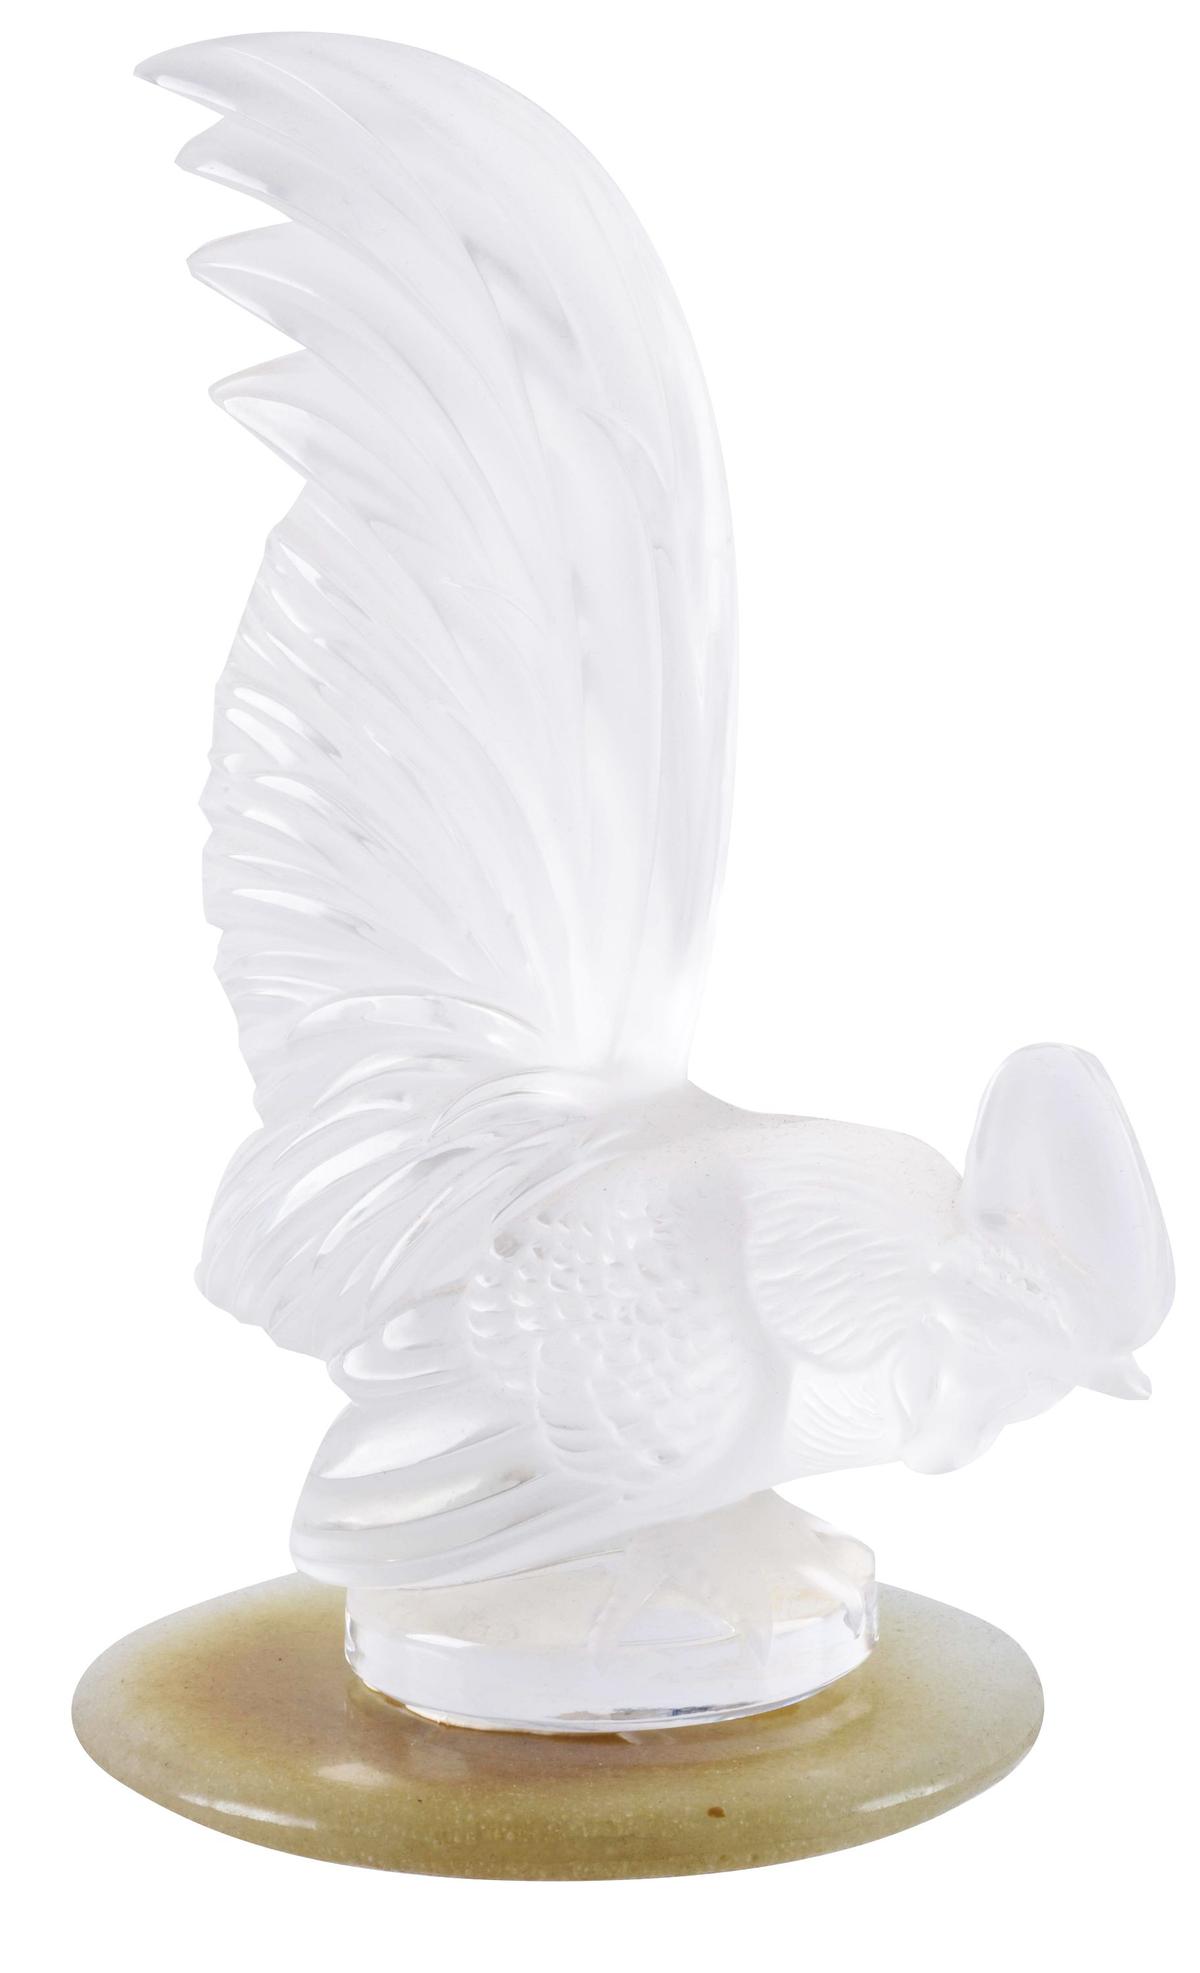 R. Lalique Frosted Glass Rooster Mascot Hood Ornament.